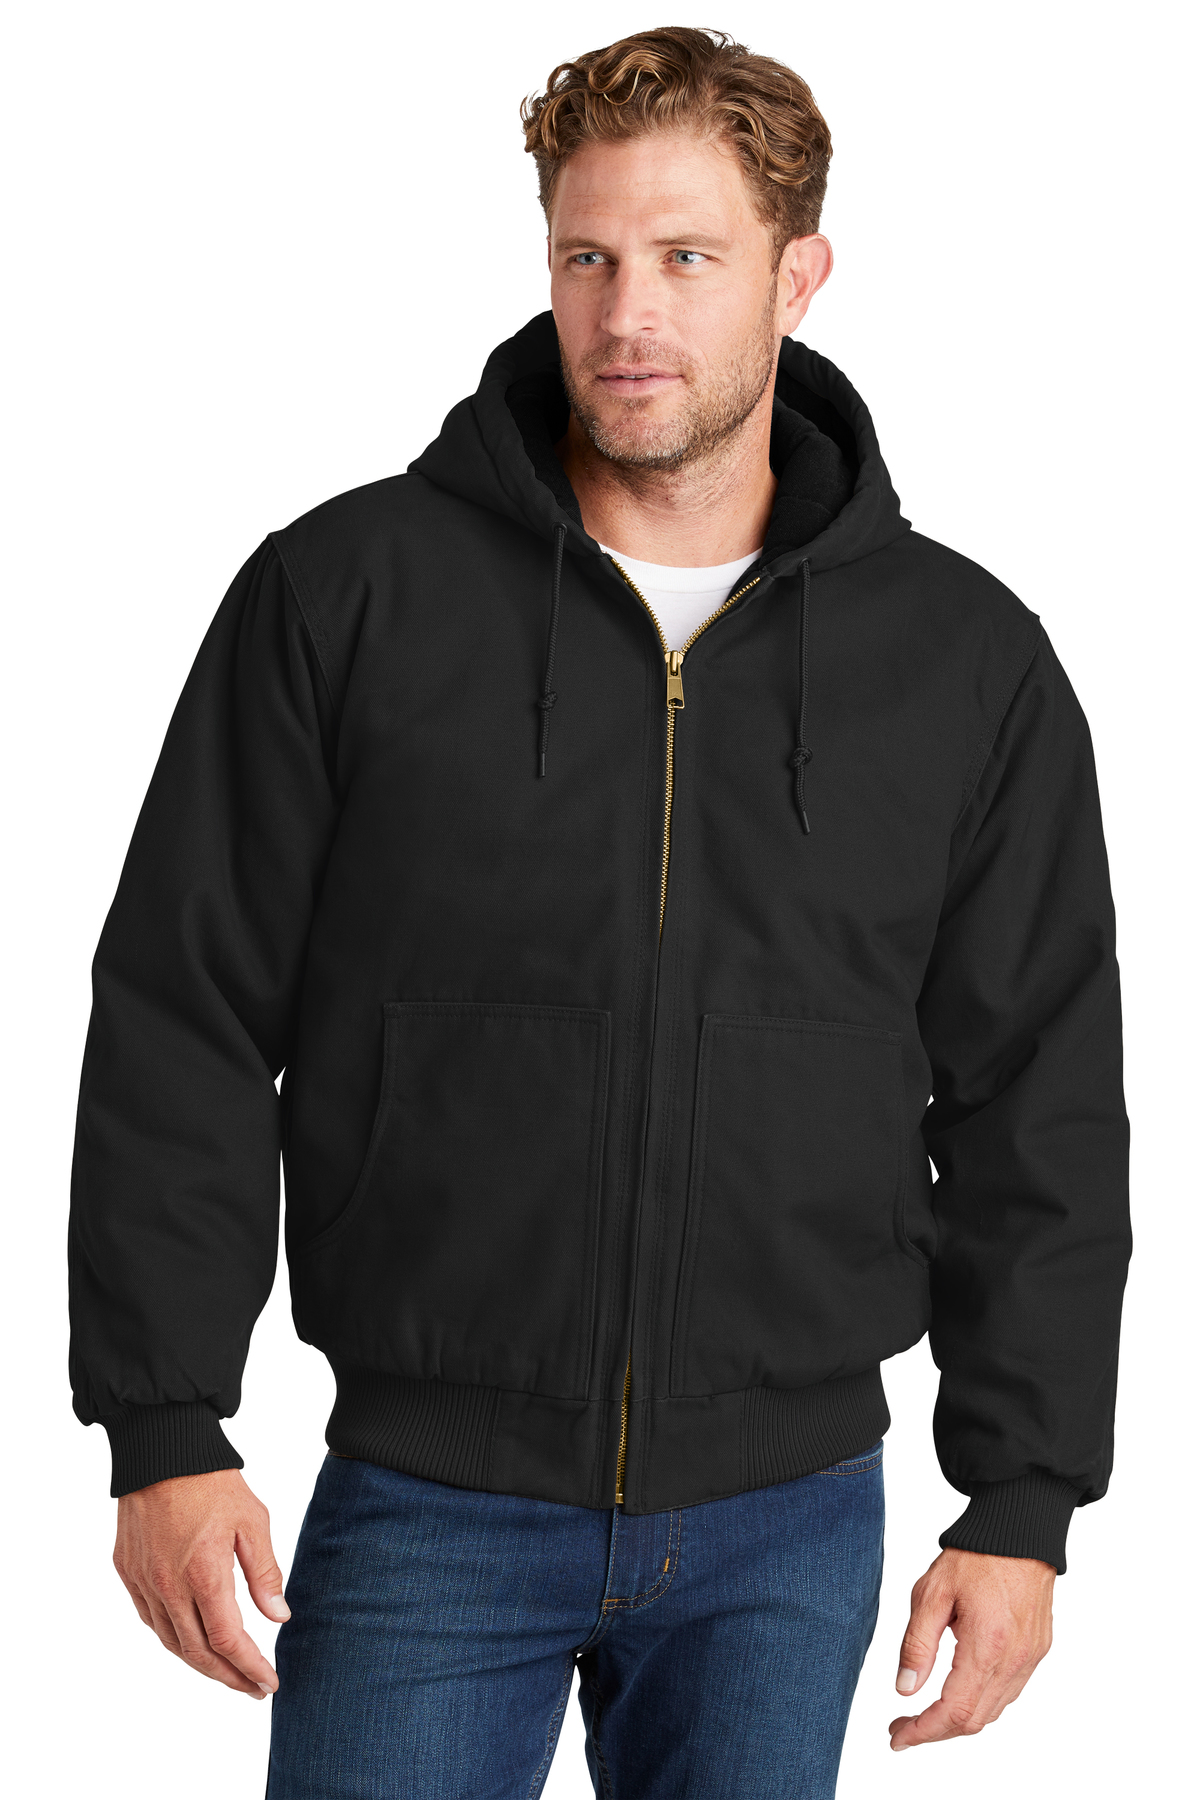 CornerStone Washed Duck Cloth Insulated Hooded Work Jacket | Product ...